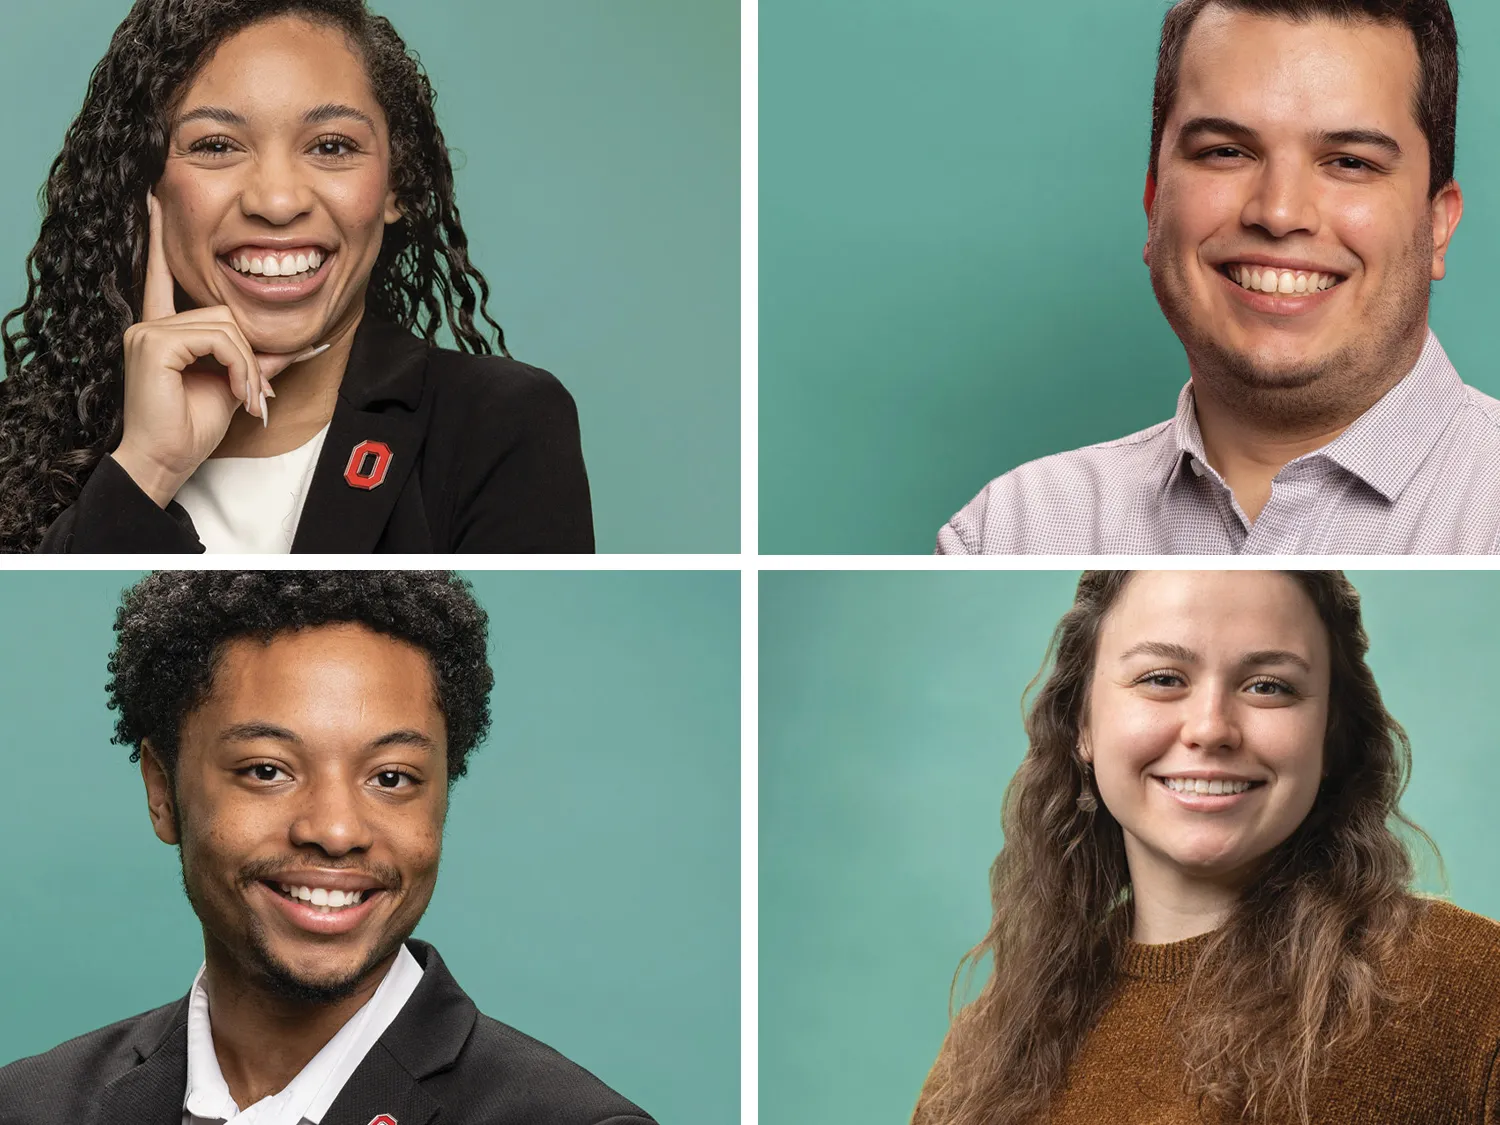 A grid of photos shows four students, all smiling as they pose and look directly into the camera. They seem friendly and smart. 